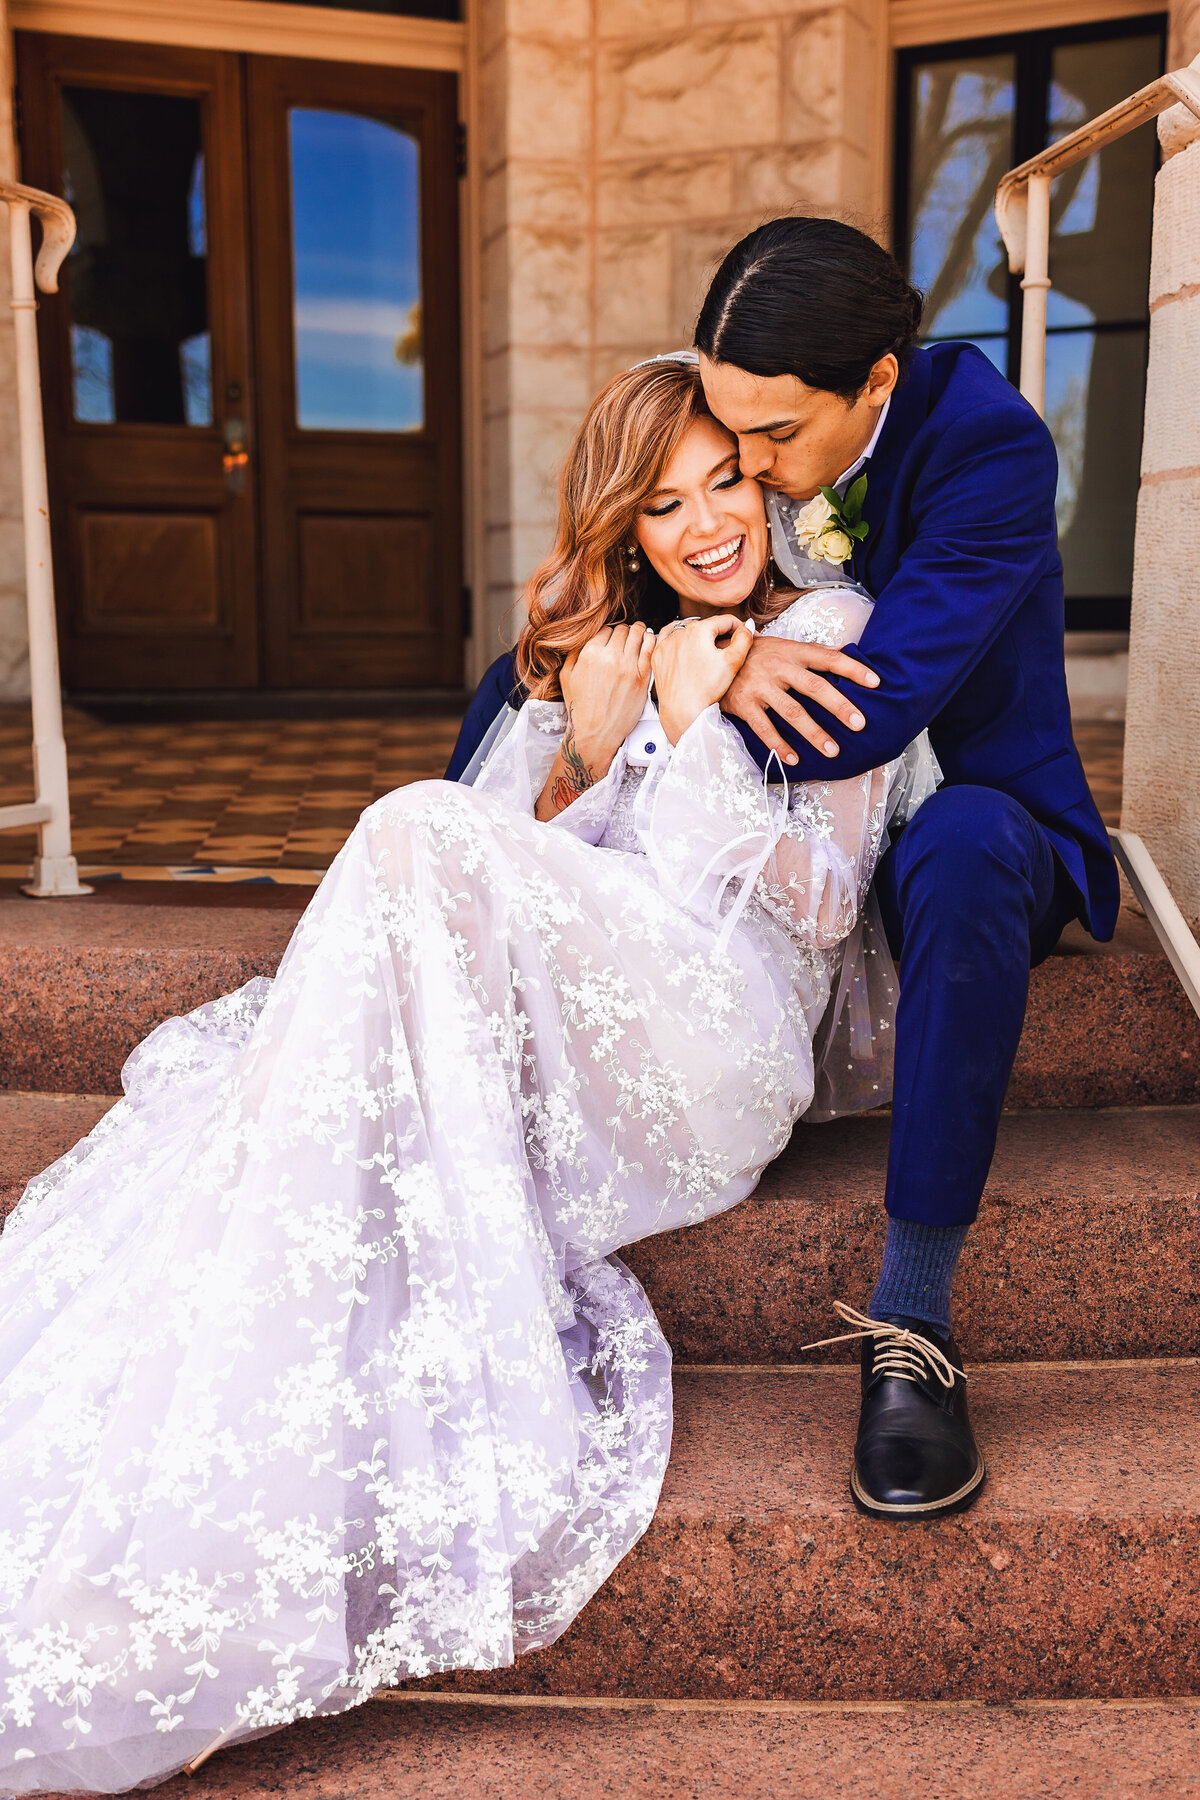 Turn your dreams into reality with a courthouse elopement in downtown New Braunfels, Texas. Vibrant colors, intimate love, and the beginning of a lifelong adventure.